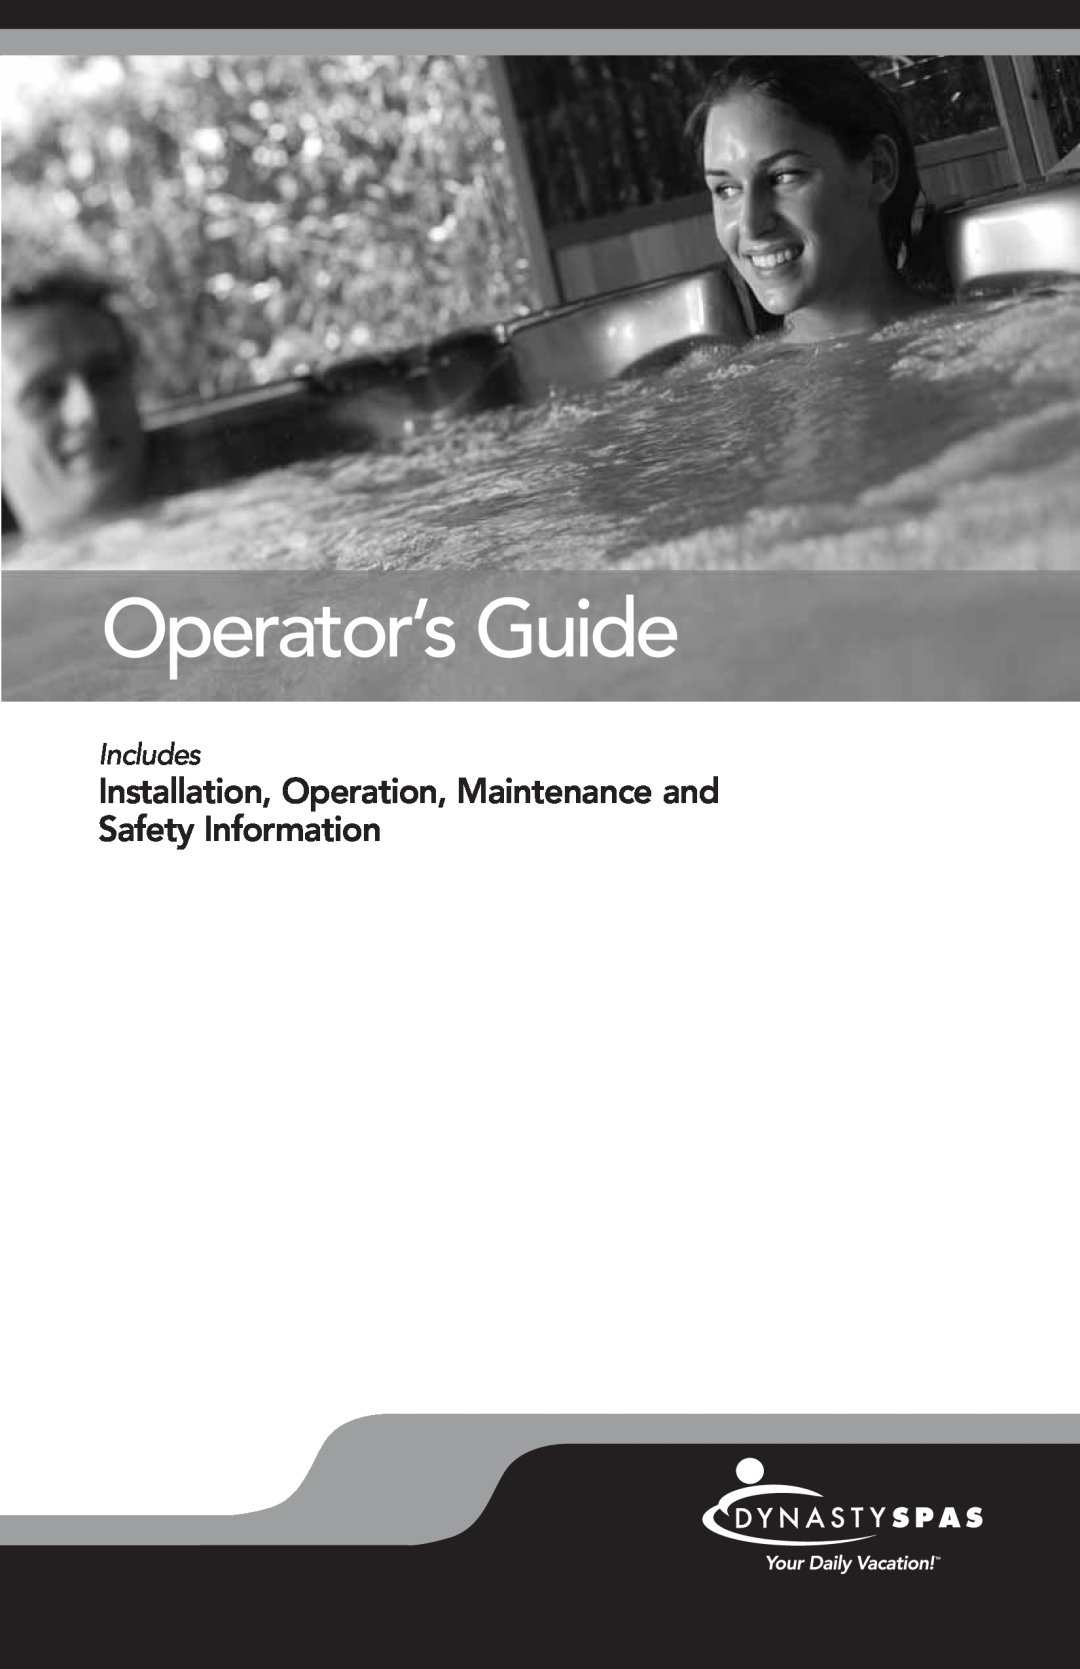 Dynasty Spas 2008 manual Operator’s Guide, Installation, Operation, Maintenance and Safety Information, Includes 